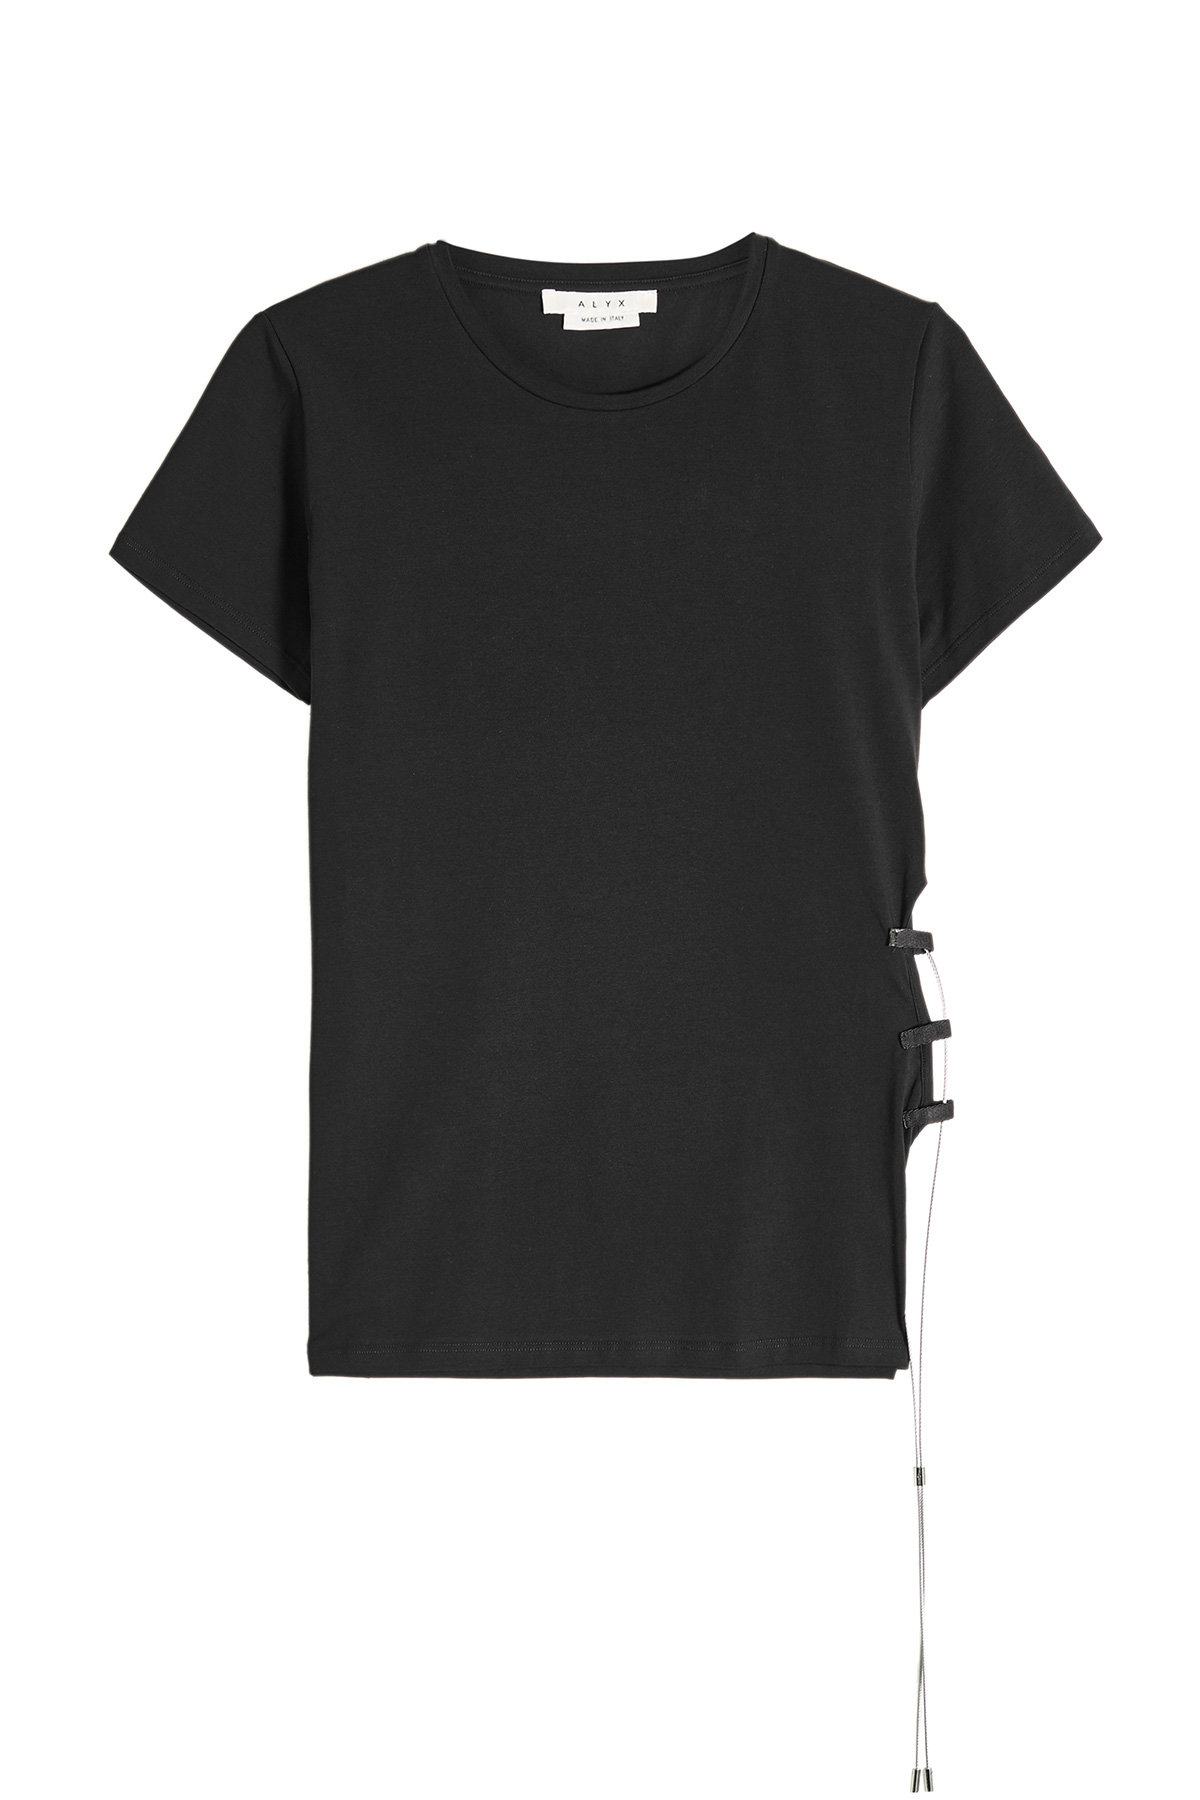 ALYX STUDIO - Cotton T-Shirt with Cut-Out Detail